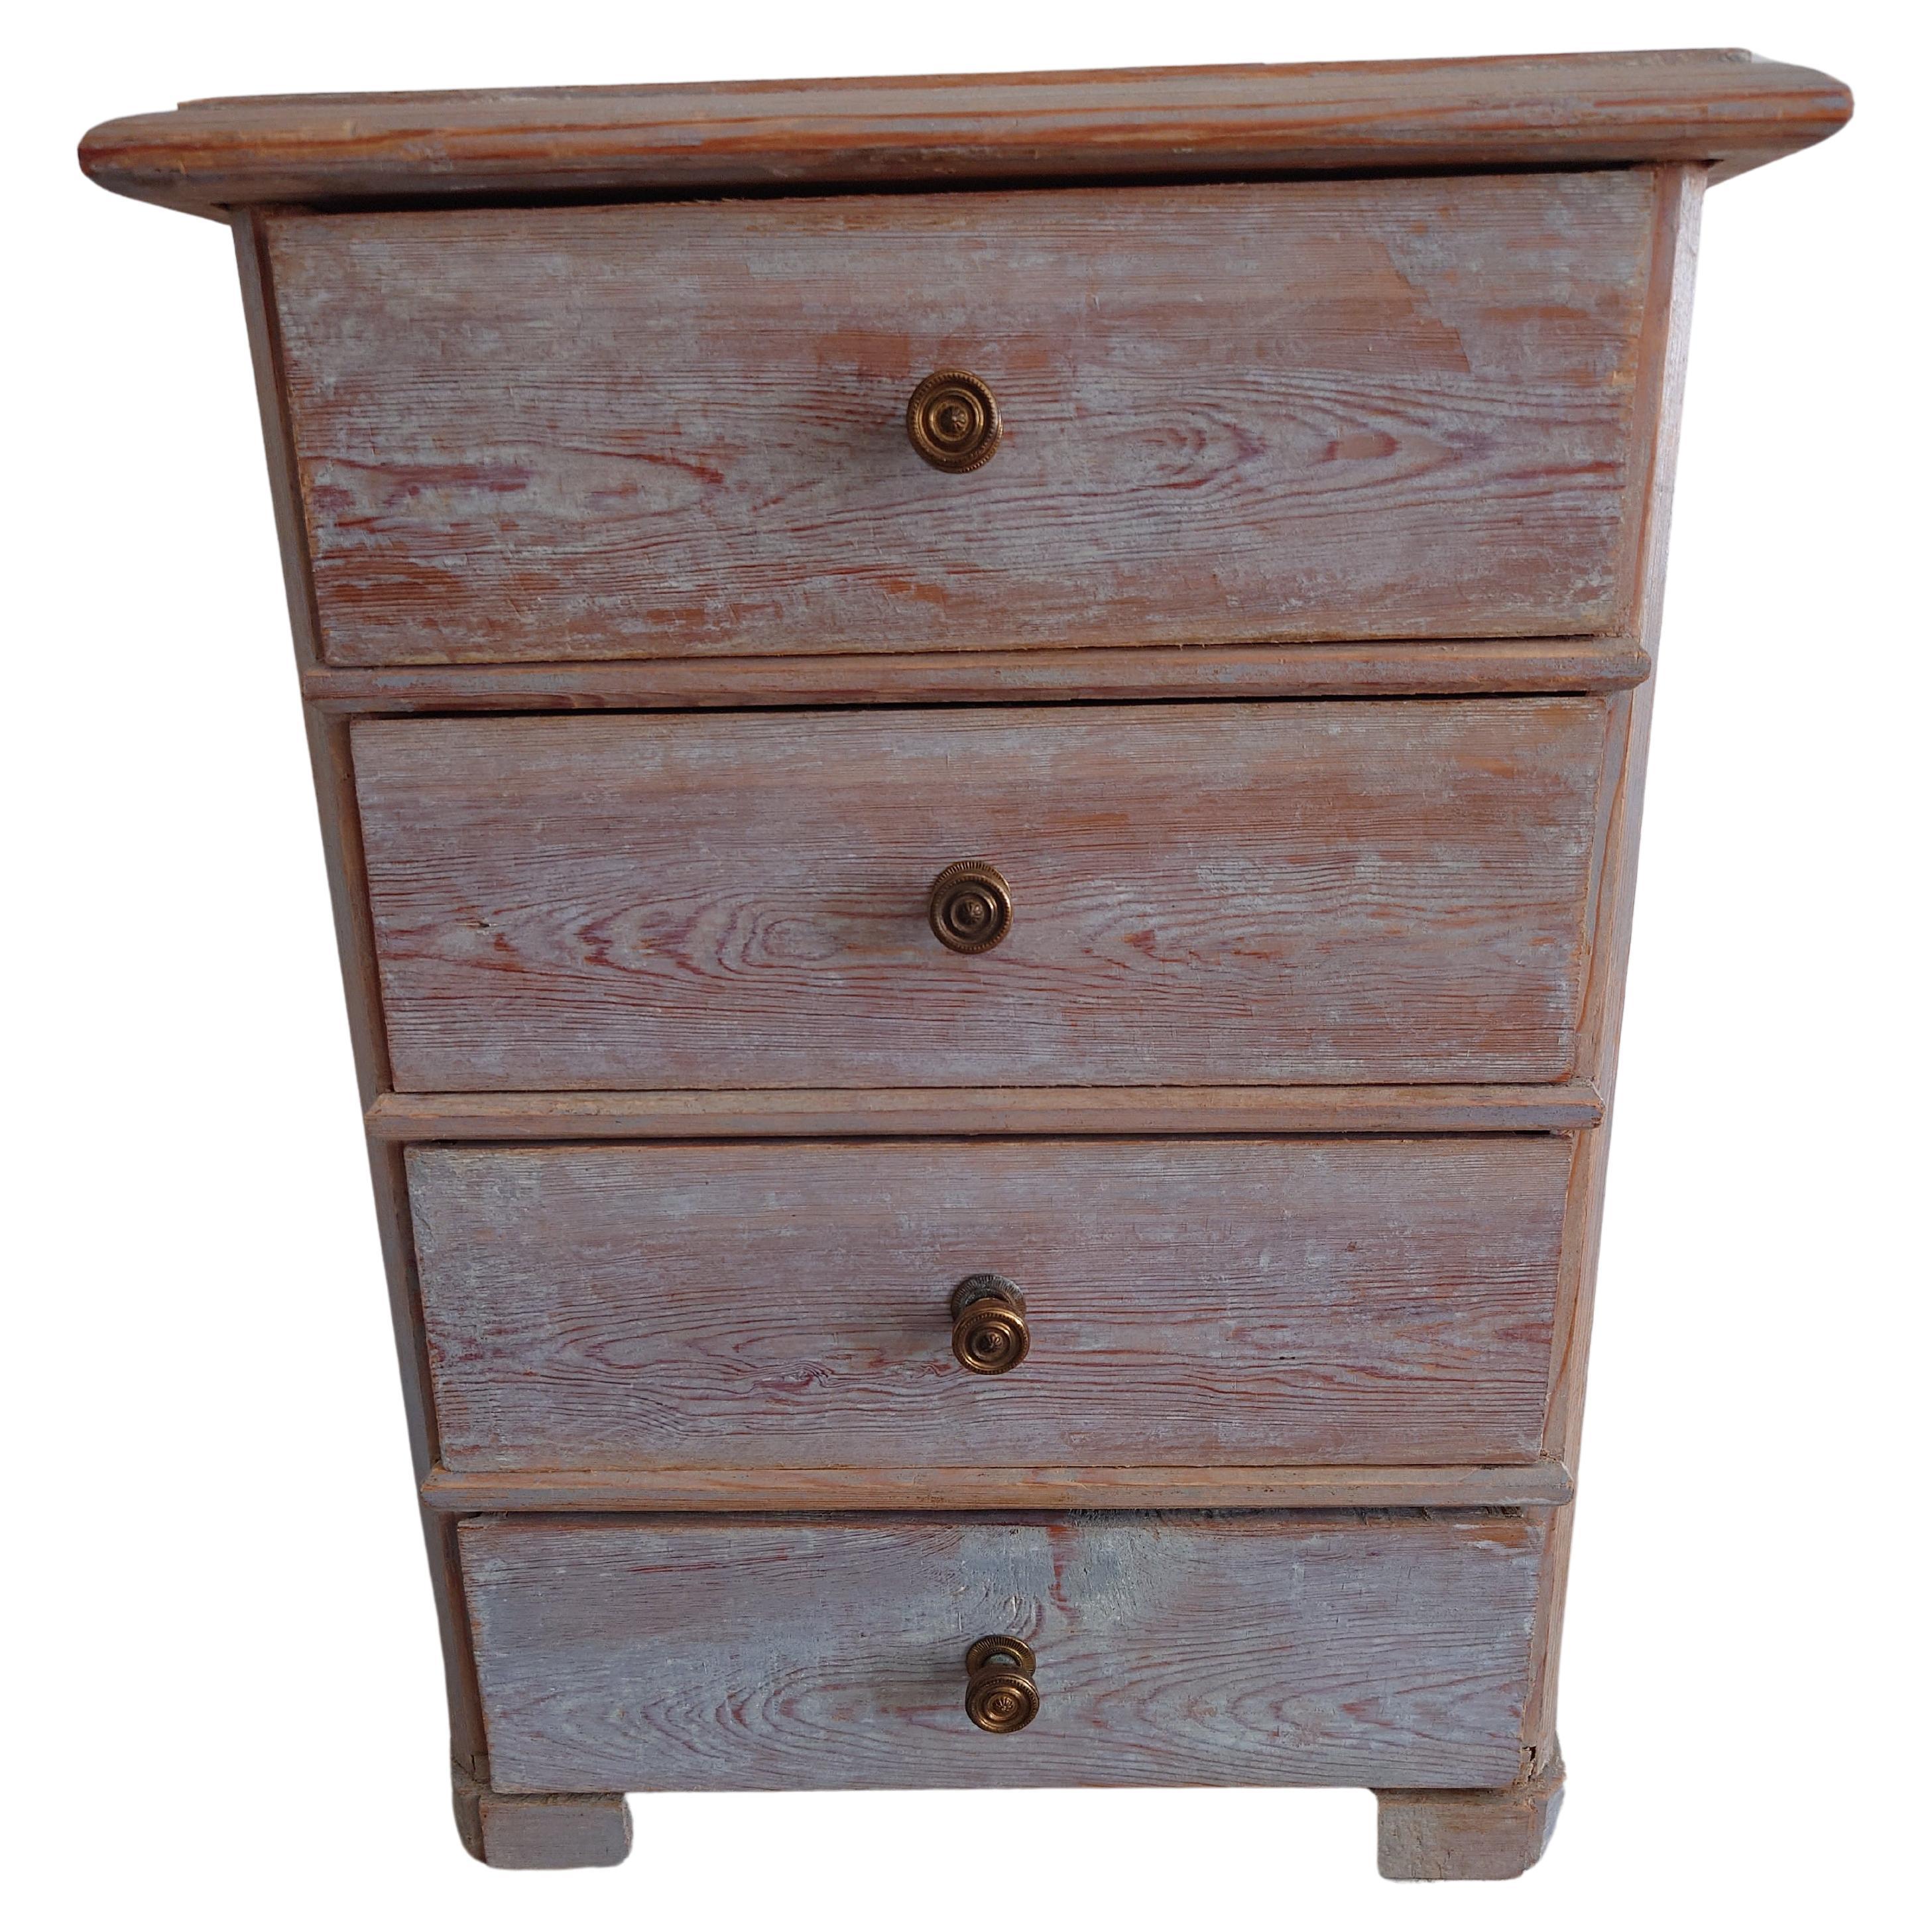 19th Century Swedish Miniature  Chest of Drawers with original paint Country 